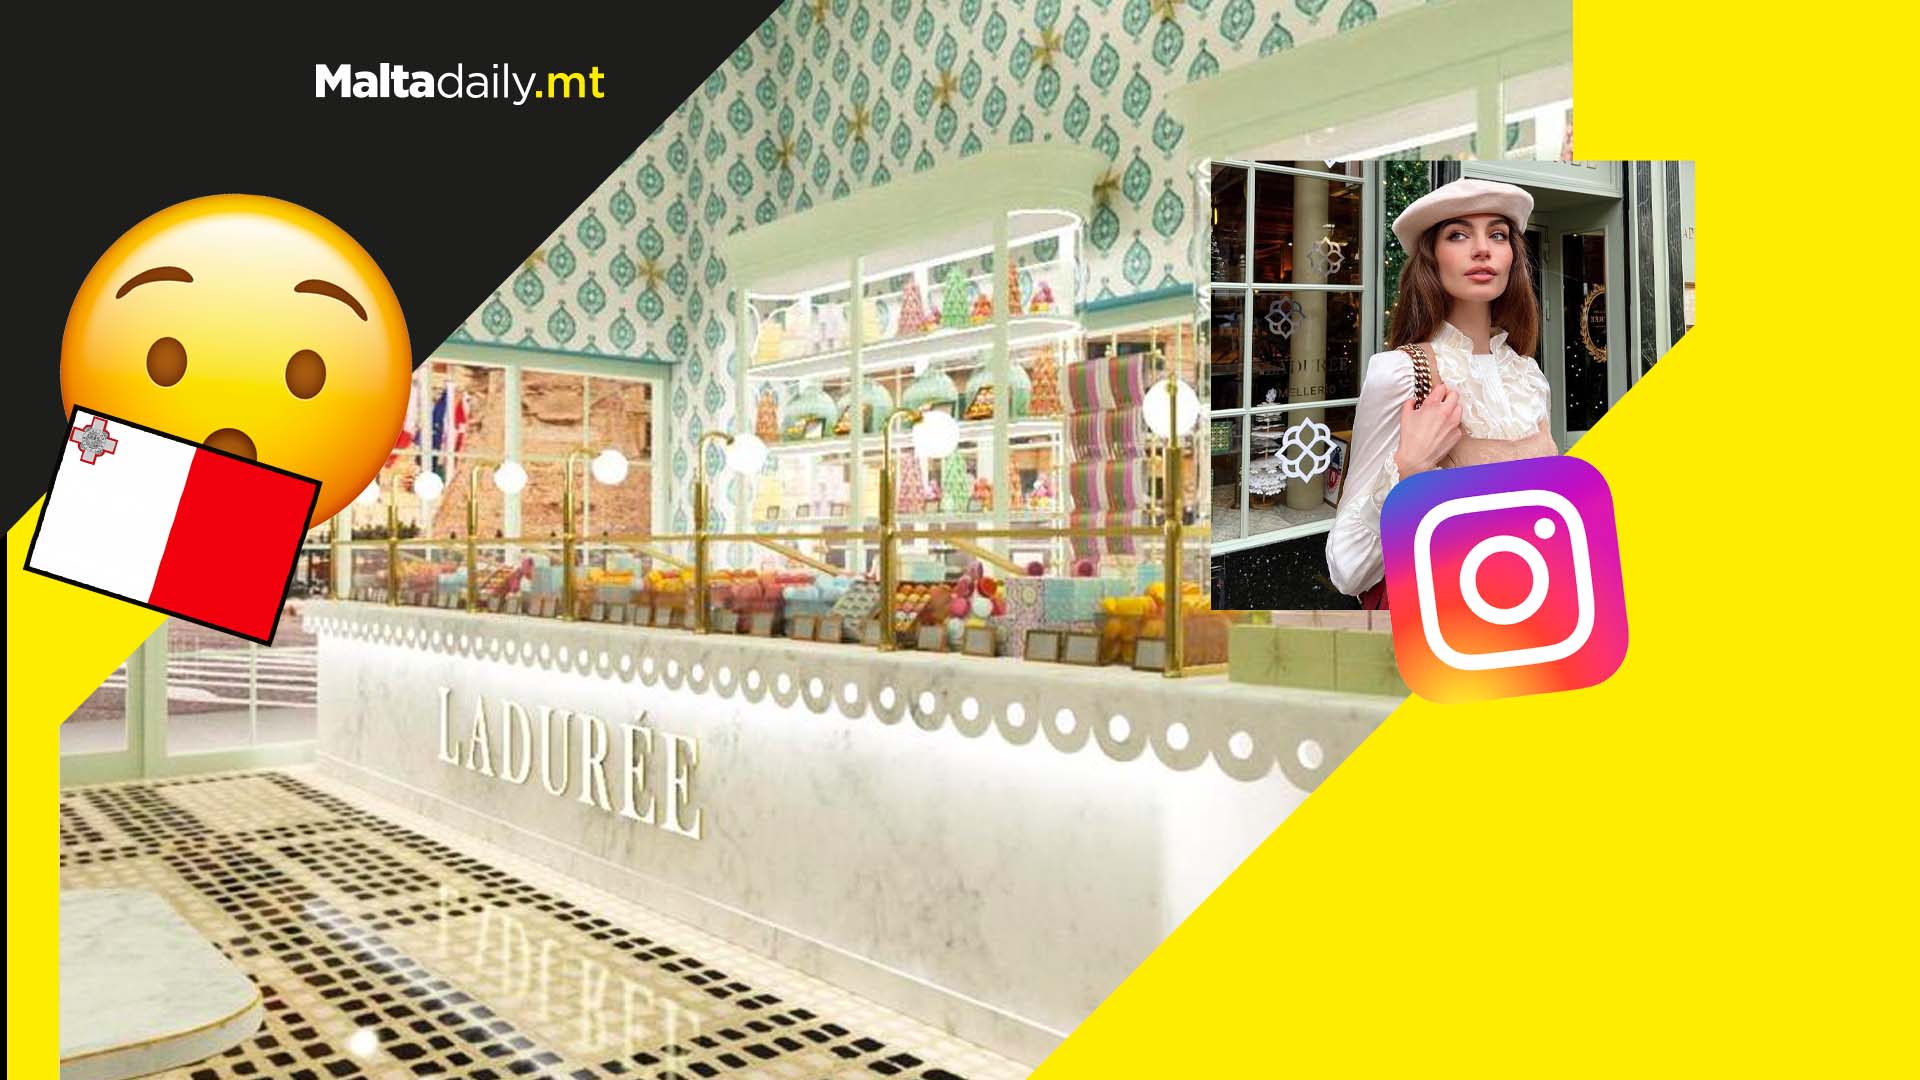 One of the most instagrammable cafes in the world is coming to Malta